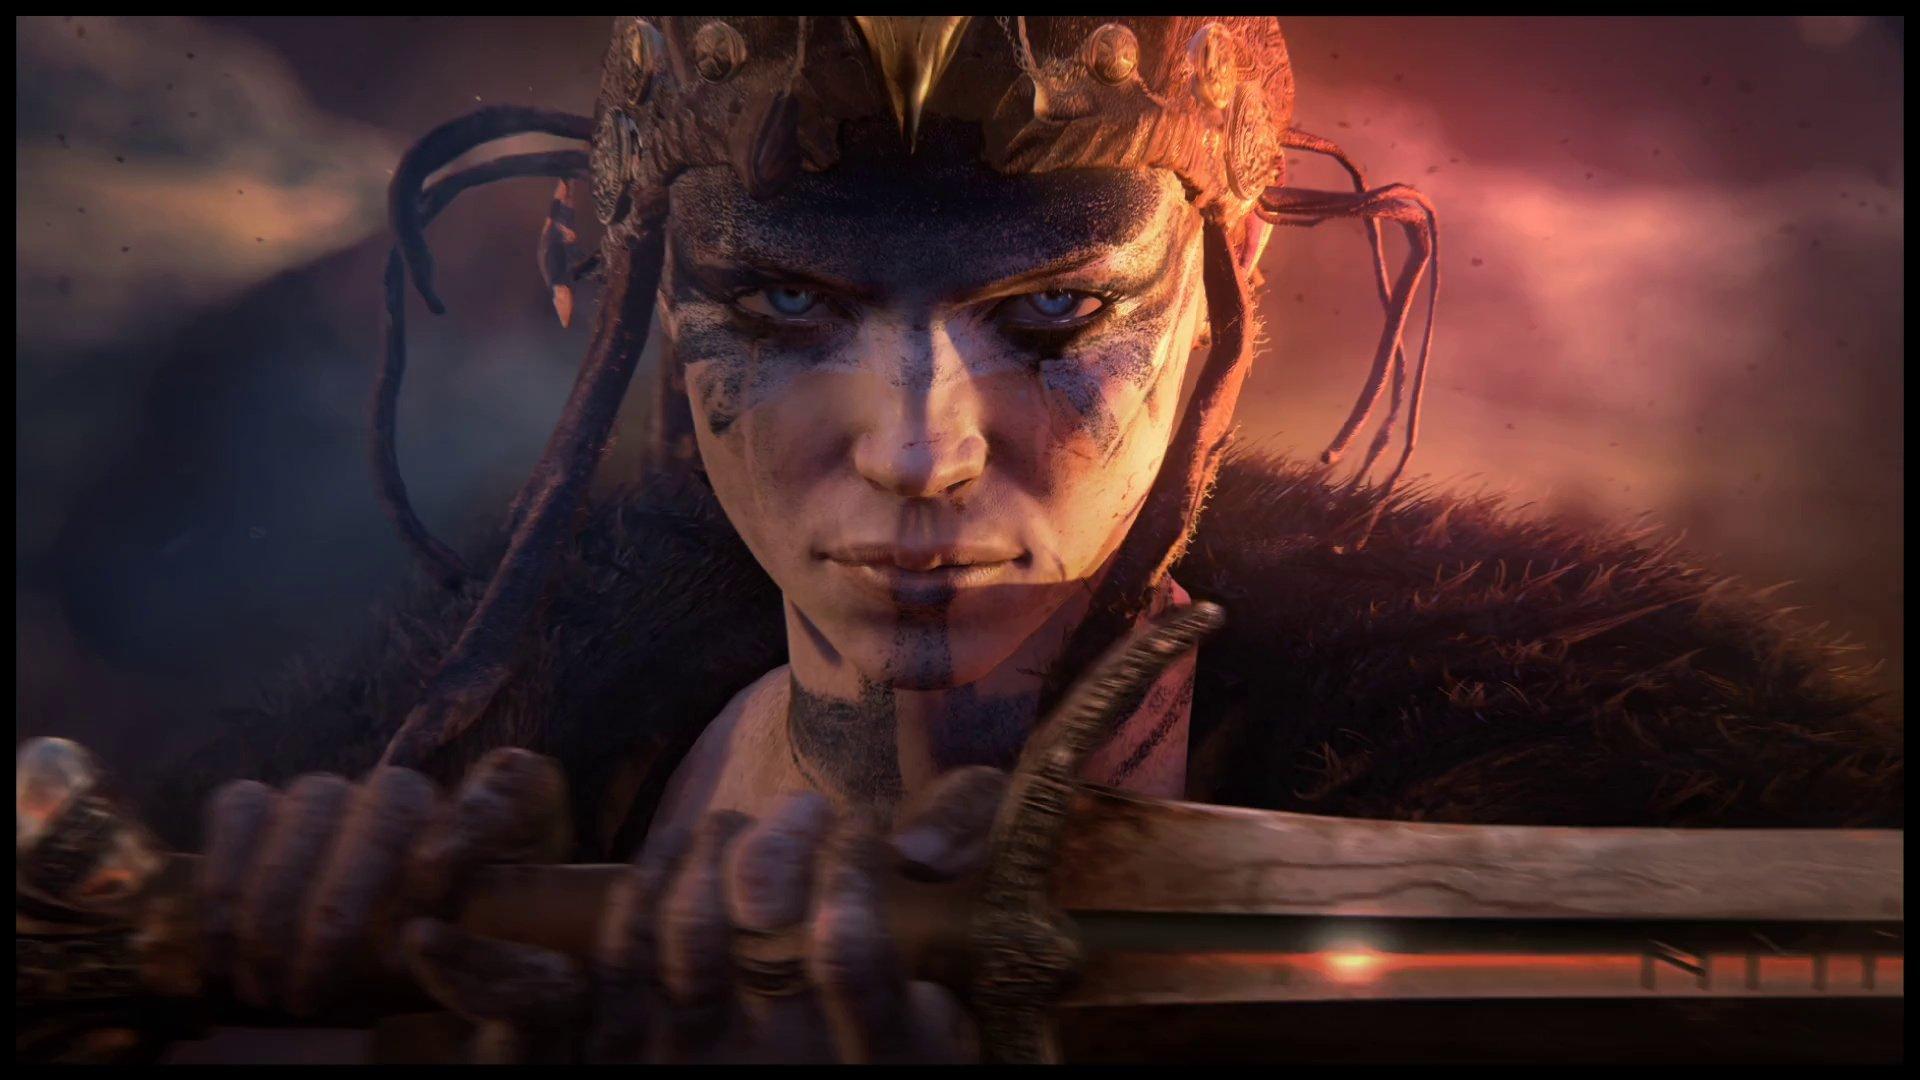 free download hellblade ps5